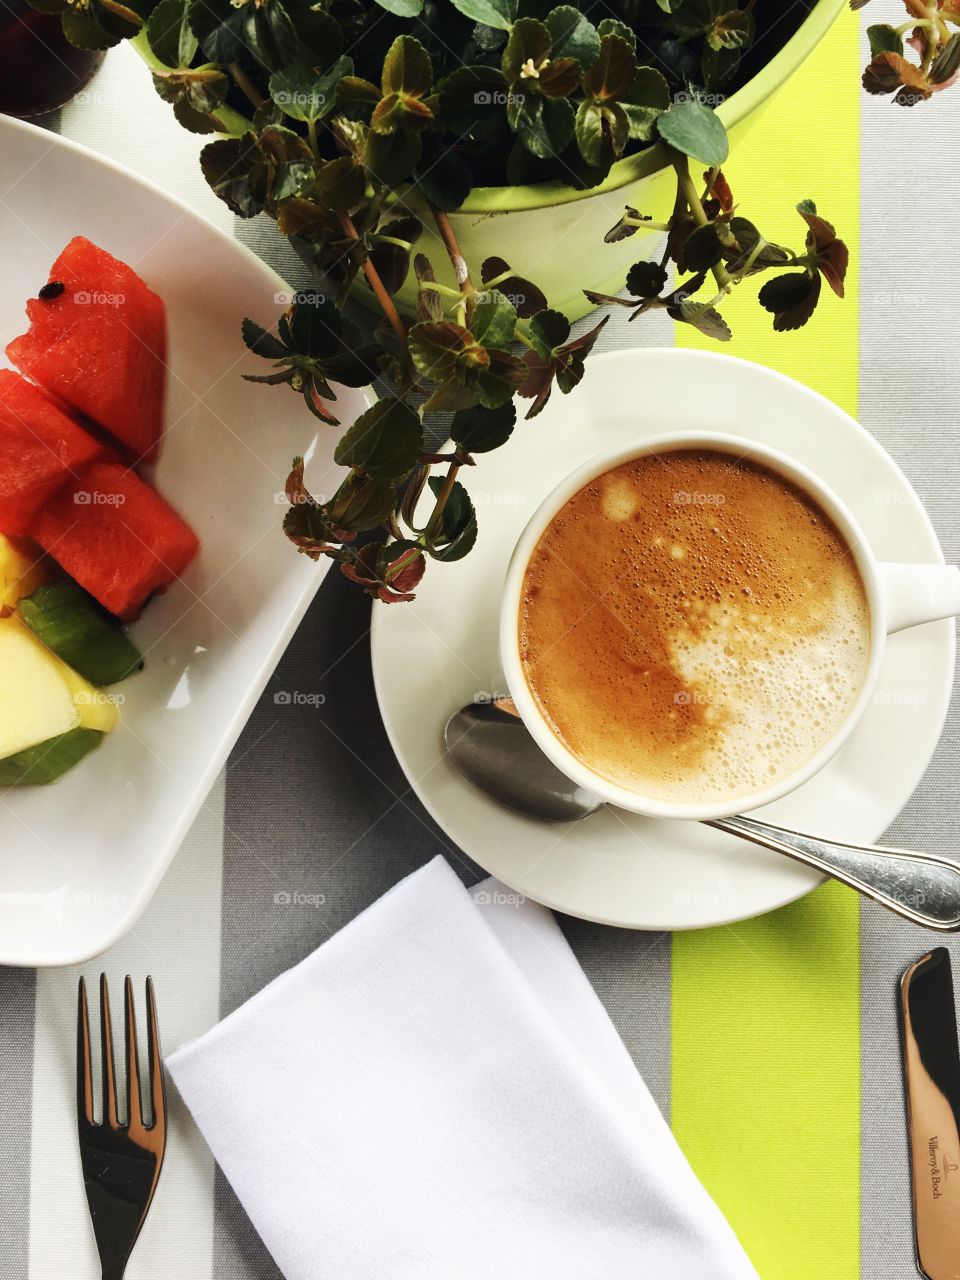 Enjoying a cappuccino with fruit. The perfect start to any day!